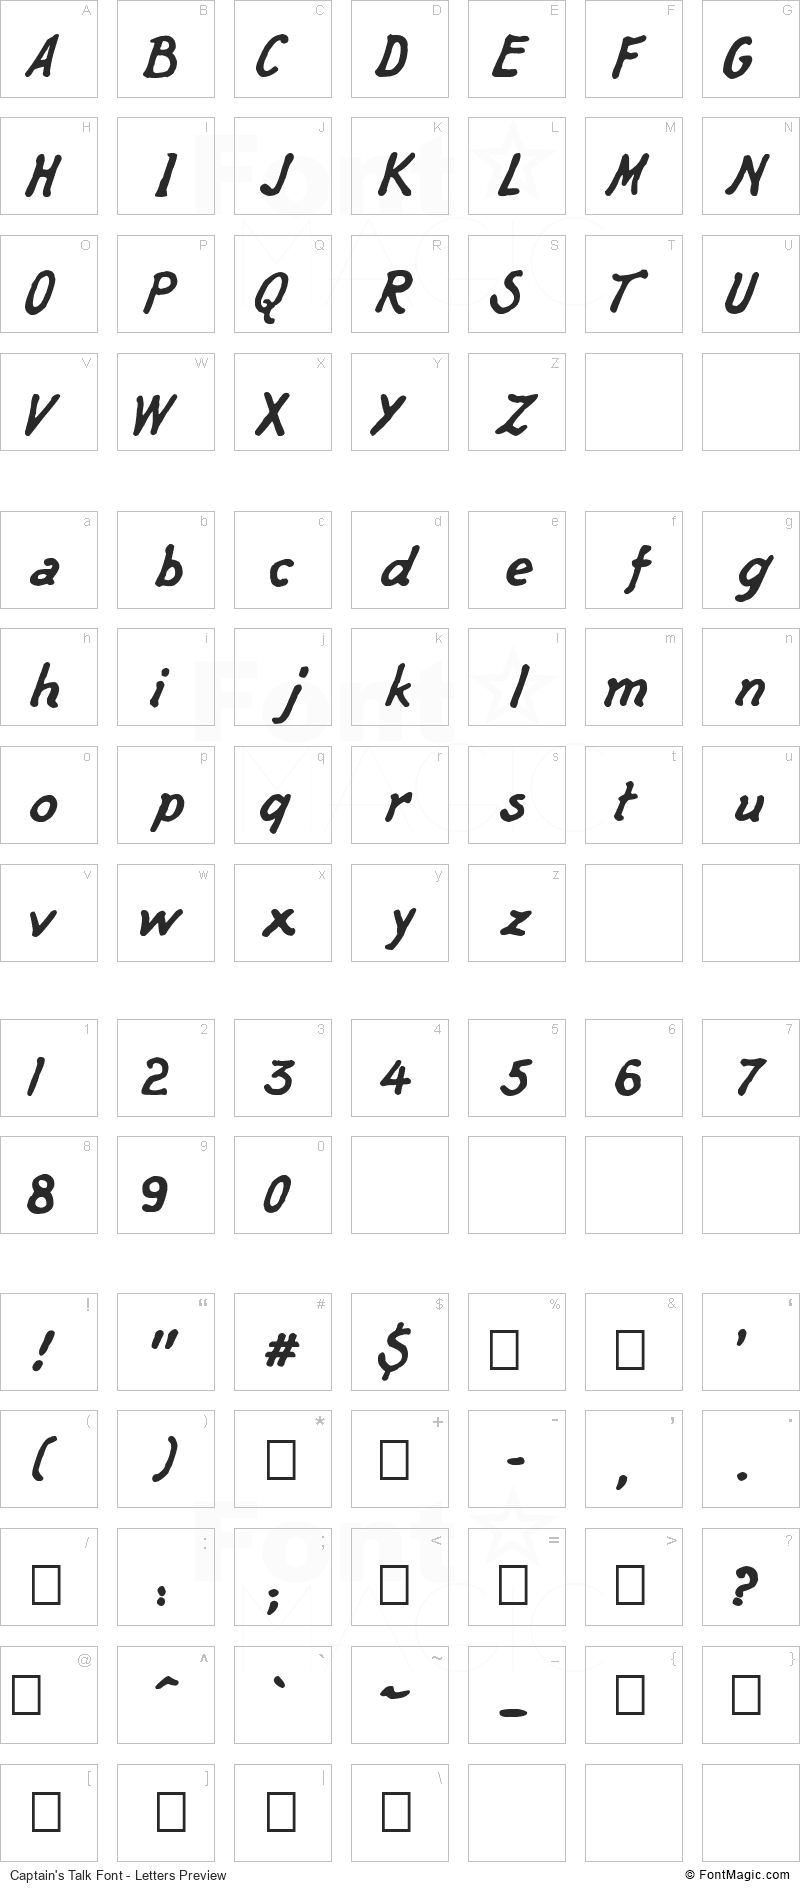 Captain’s Talk Font - All Latters Preview Chart